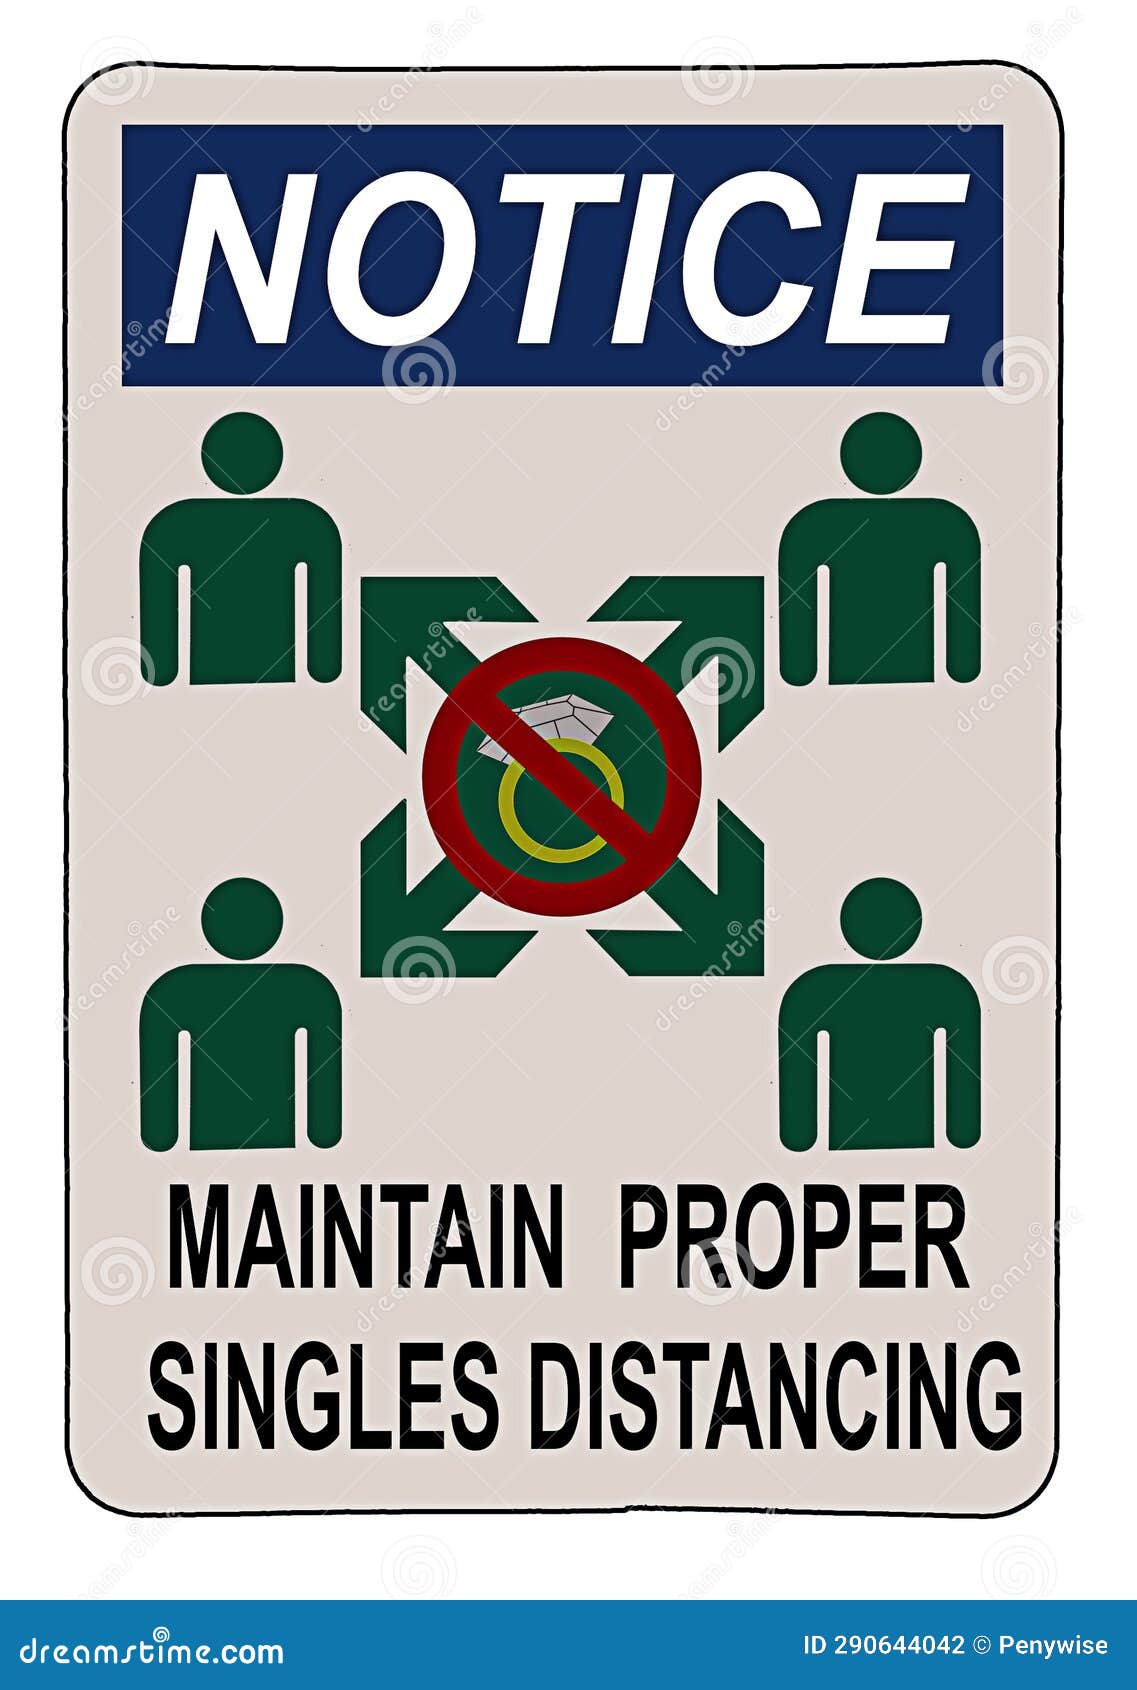 maintain proper single distancing